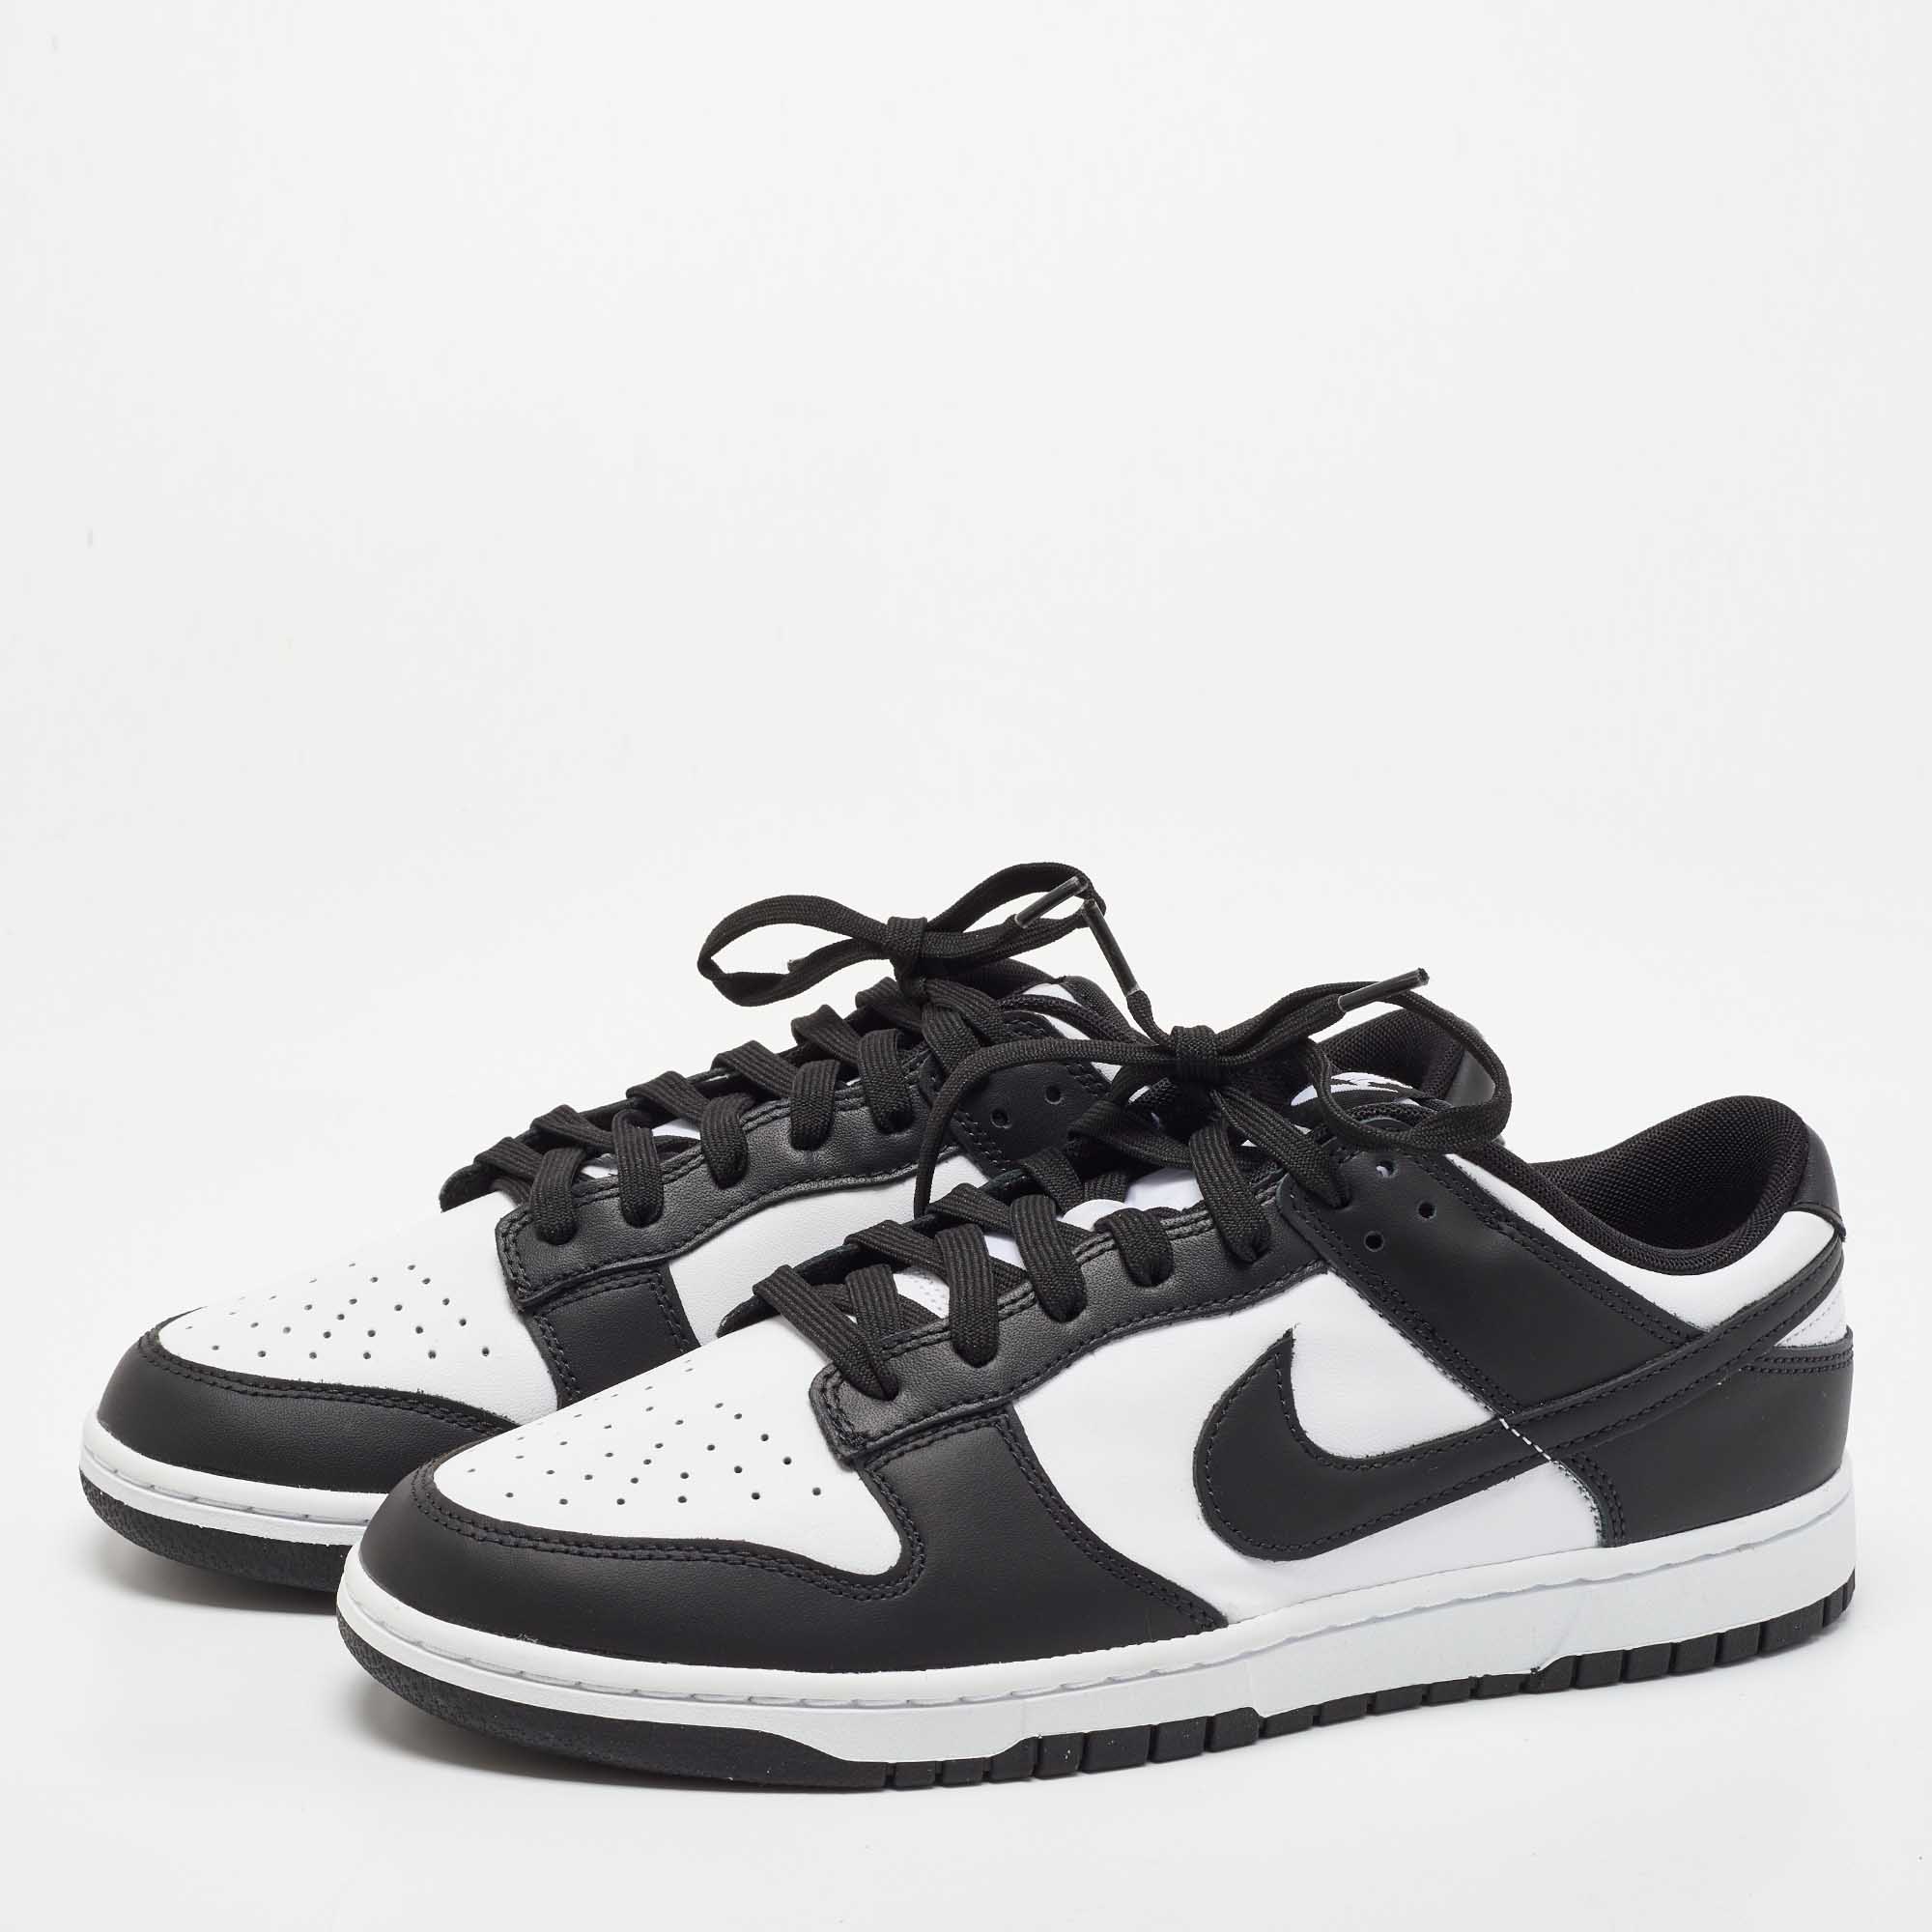 

Nike White/Black Leather Dunk Low Sneakers Size